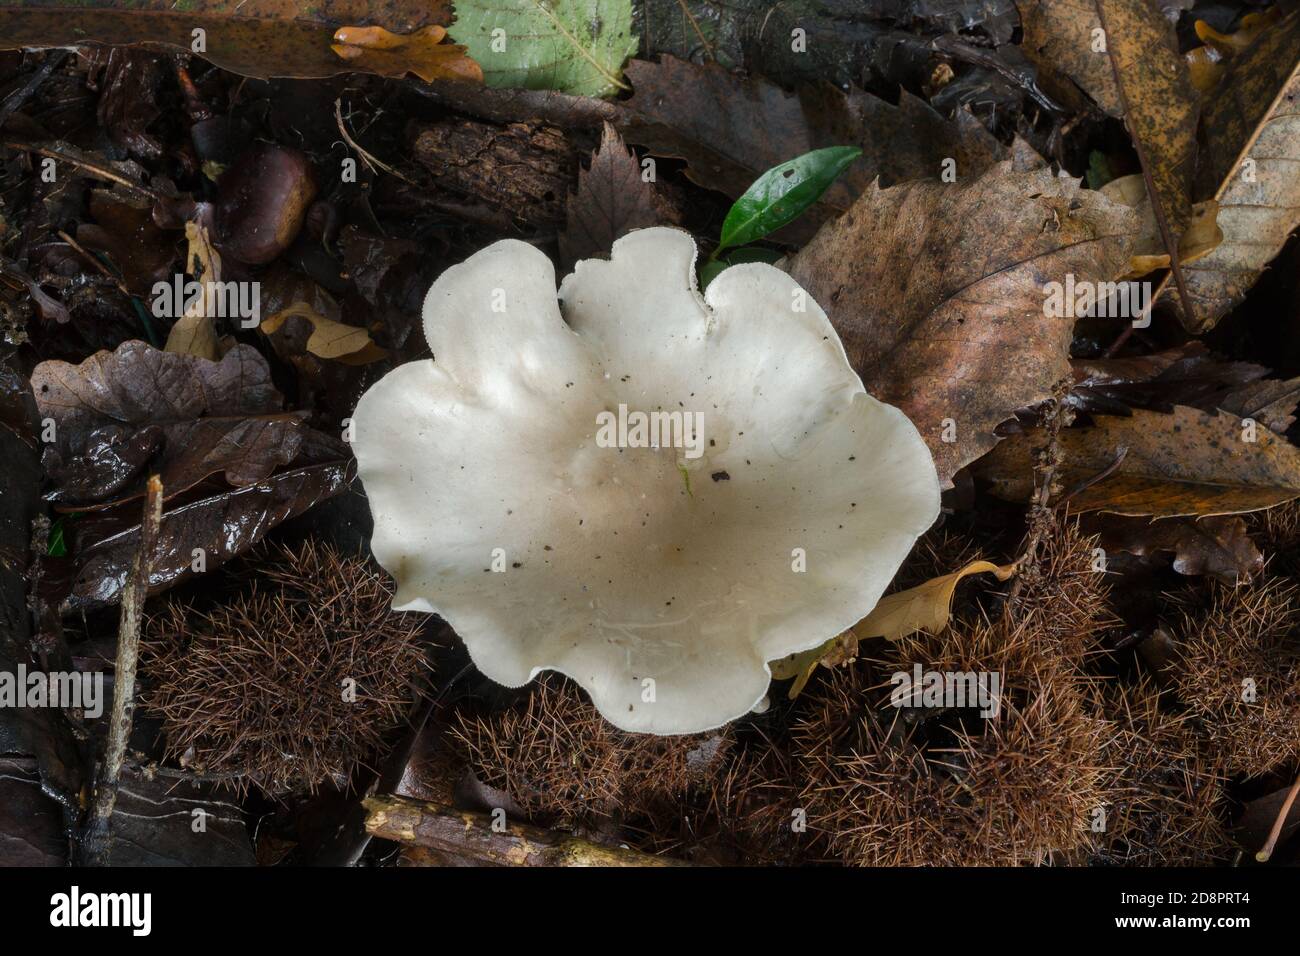 The clitopilus prunulus mushroom growing next to some decaying branches in fall woodland. Stock Photo